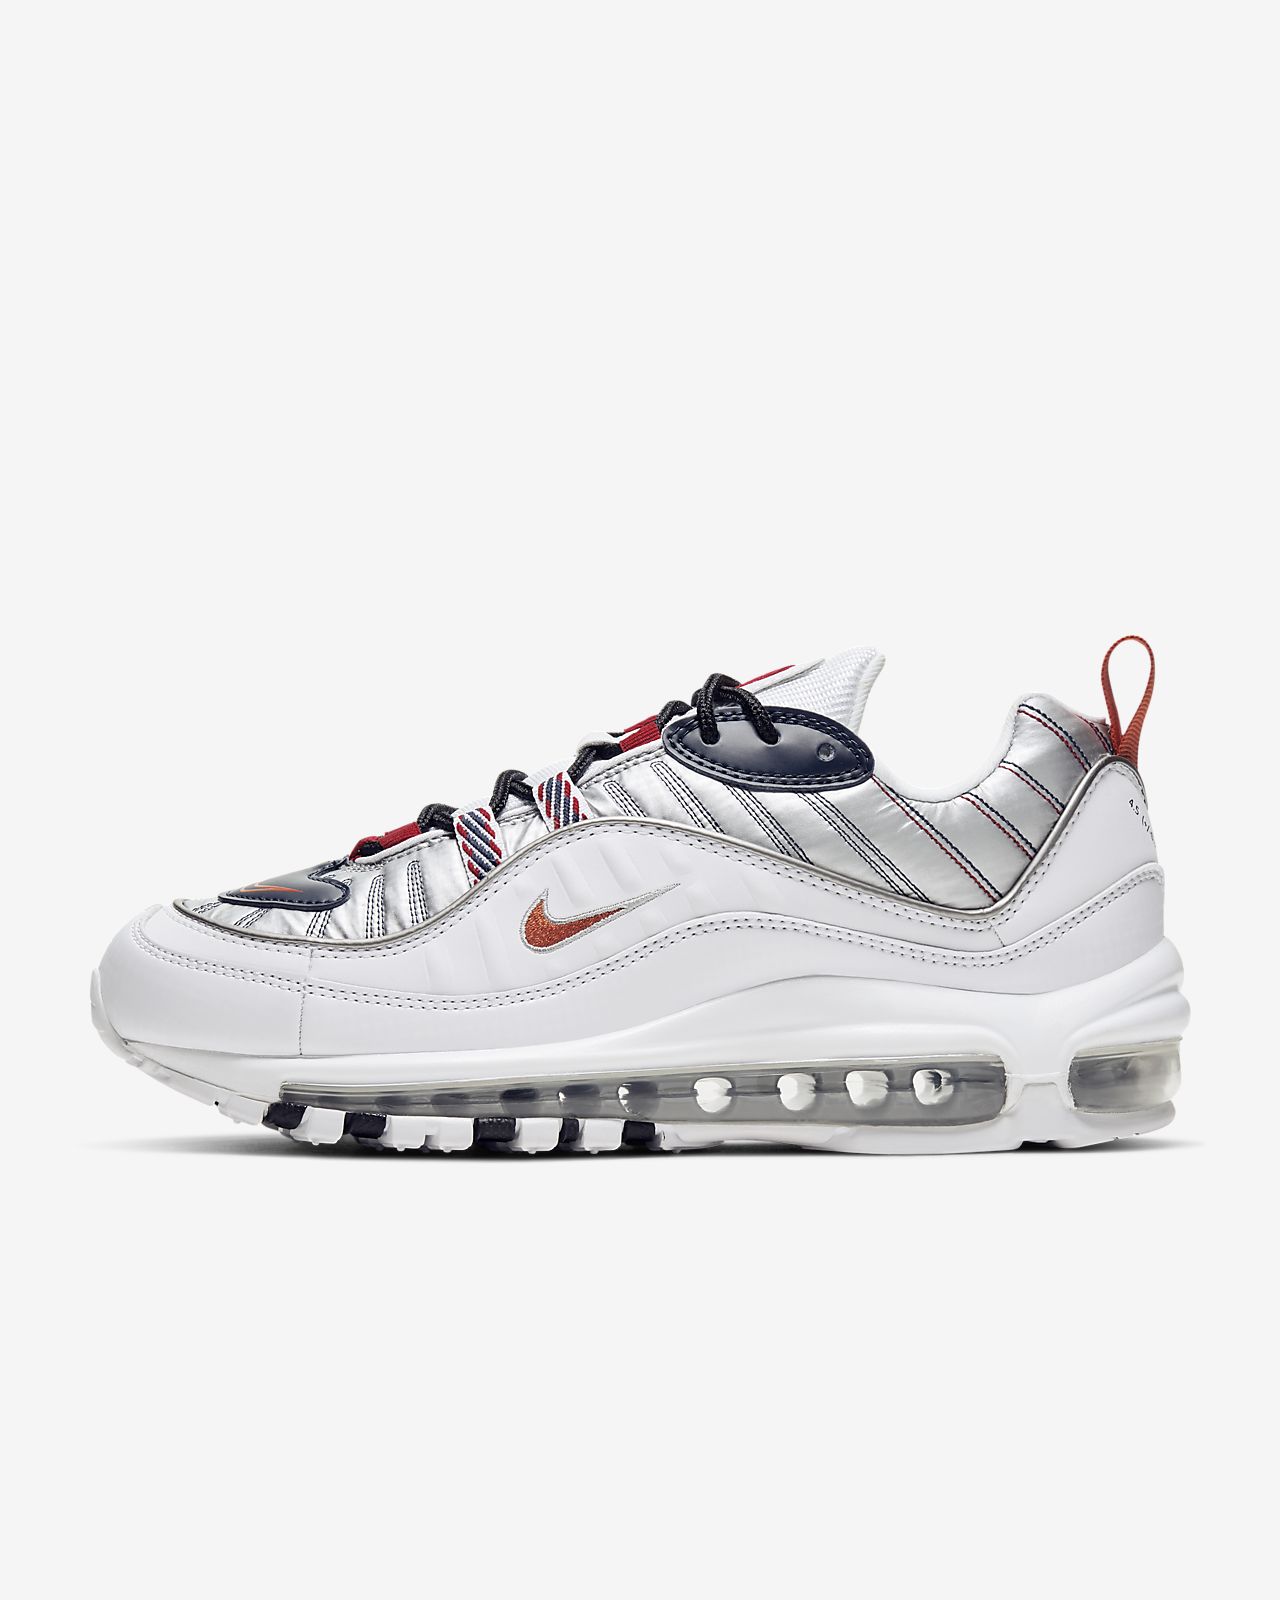 nike 98 just do it